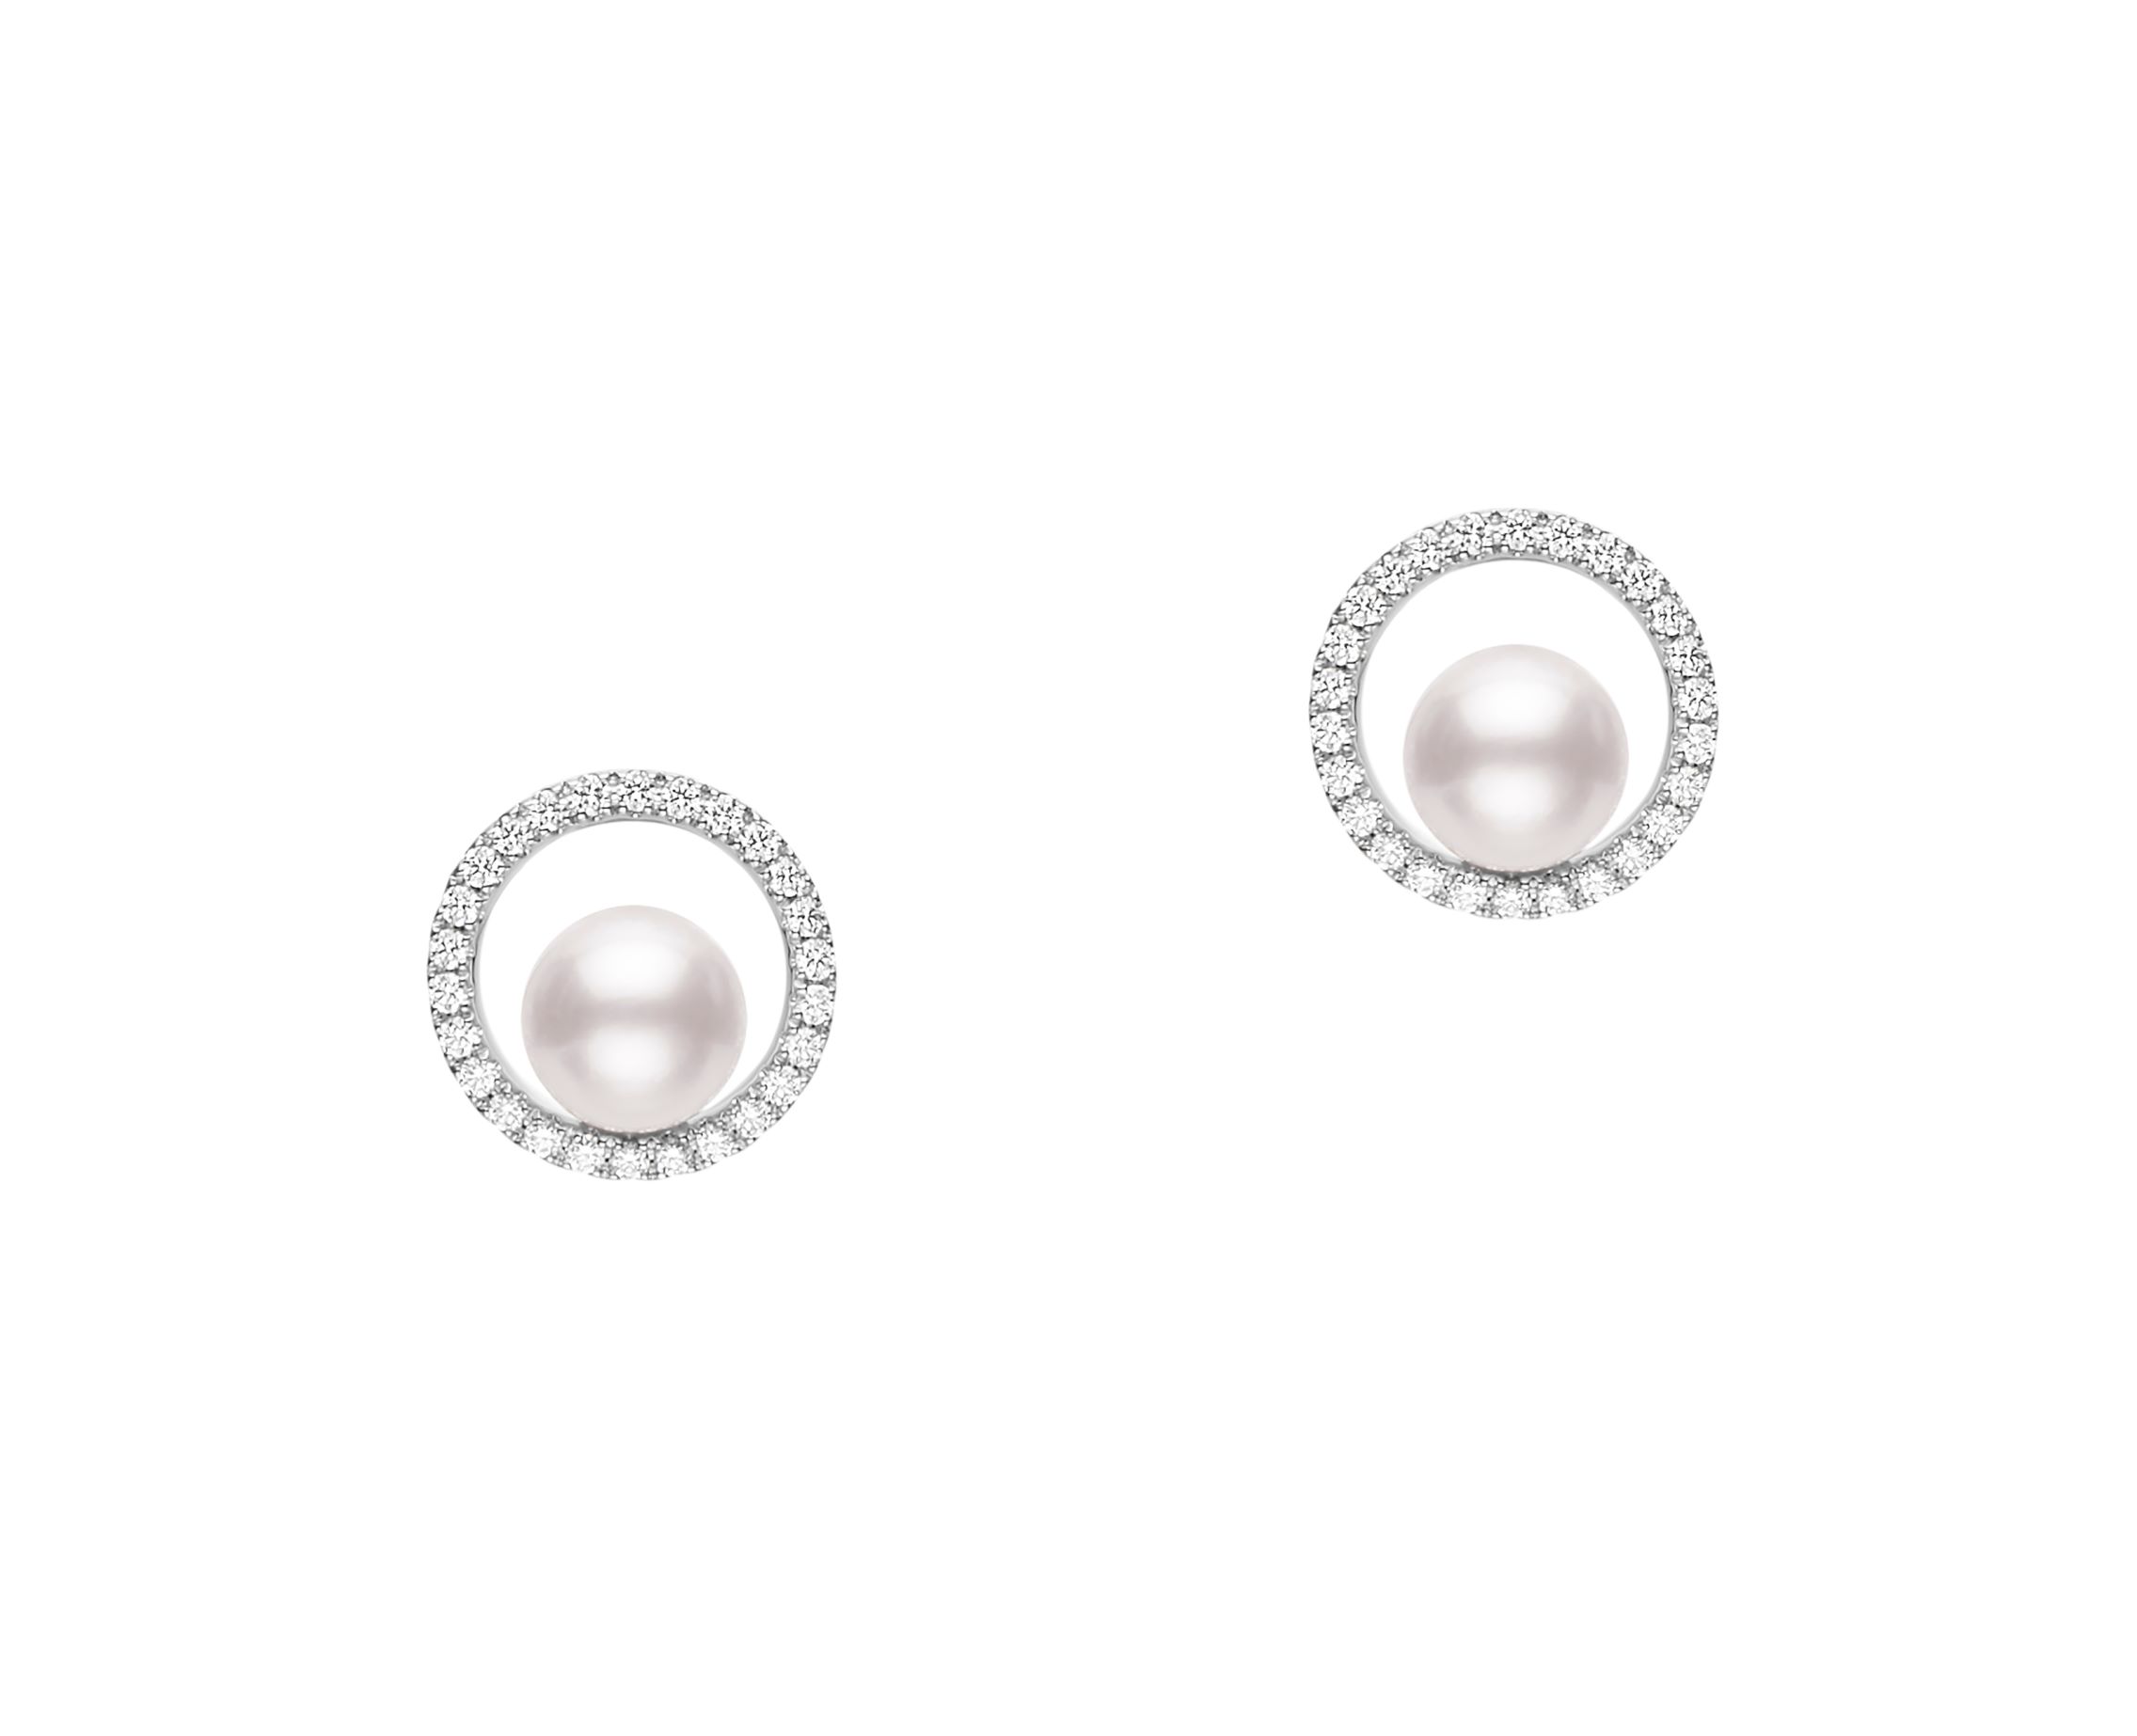 This pair of diamond and pearl earrings by Mikimoto is crafted from 18k white gold and features 6mm white pearls and 0.26 total carats of diamonds around the halo.